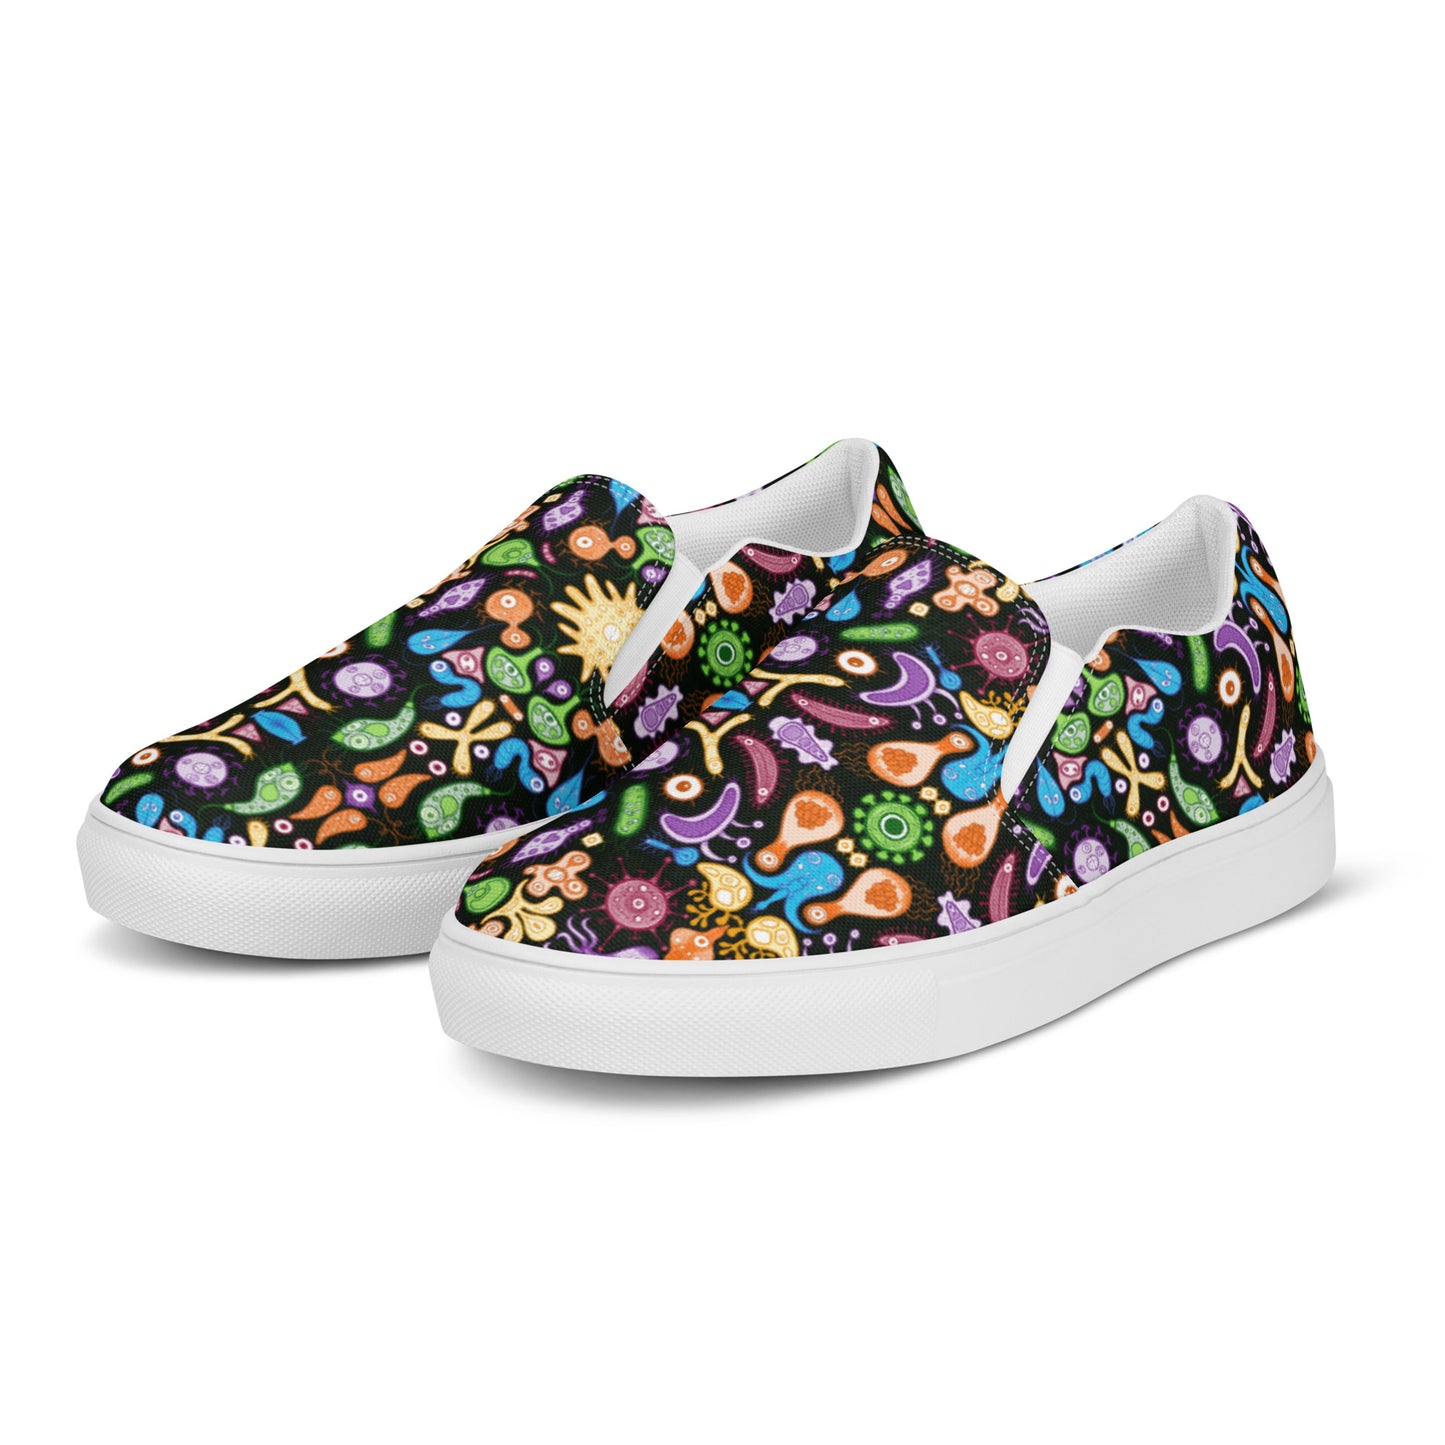 Don't be afraid of microorganisms Men’s slip-on canvas shoes. Overview